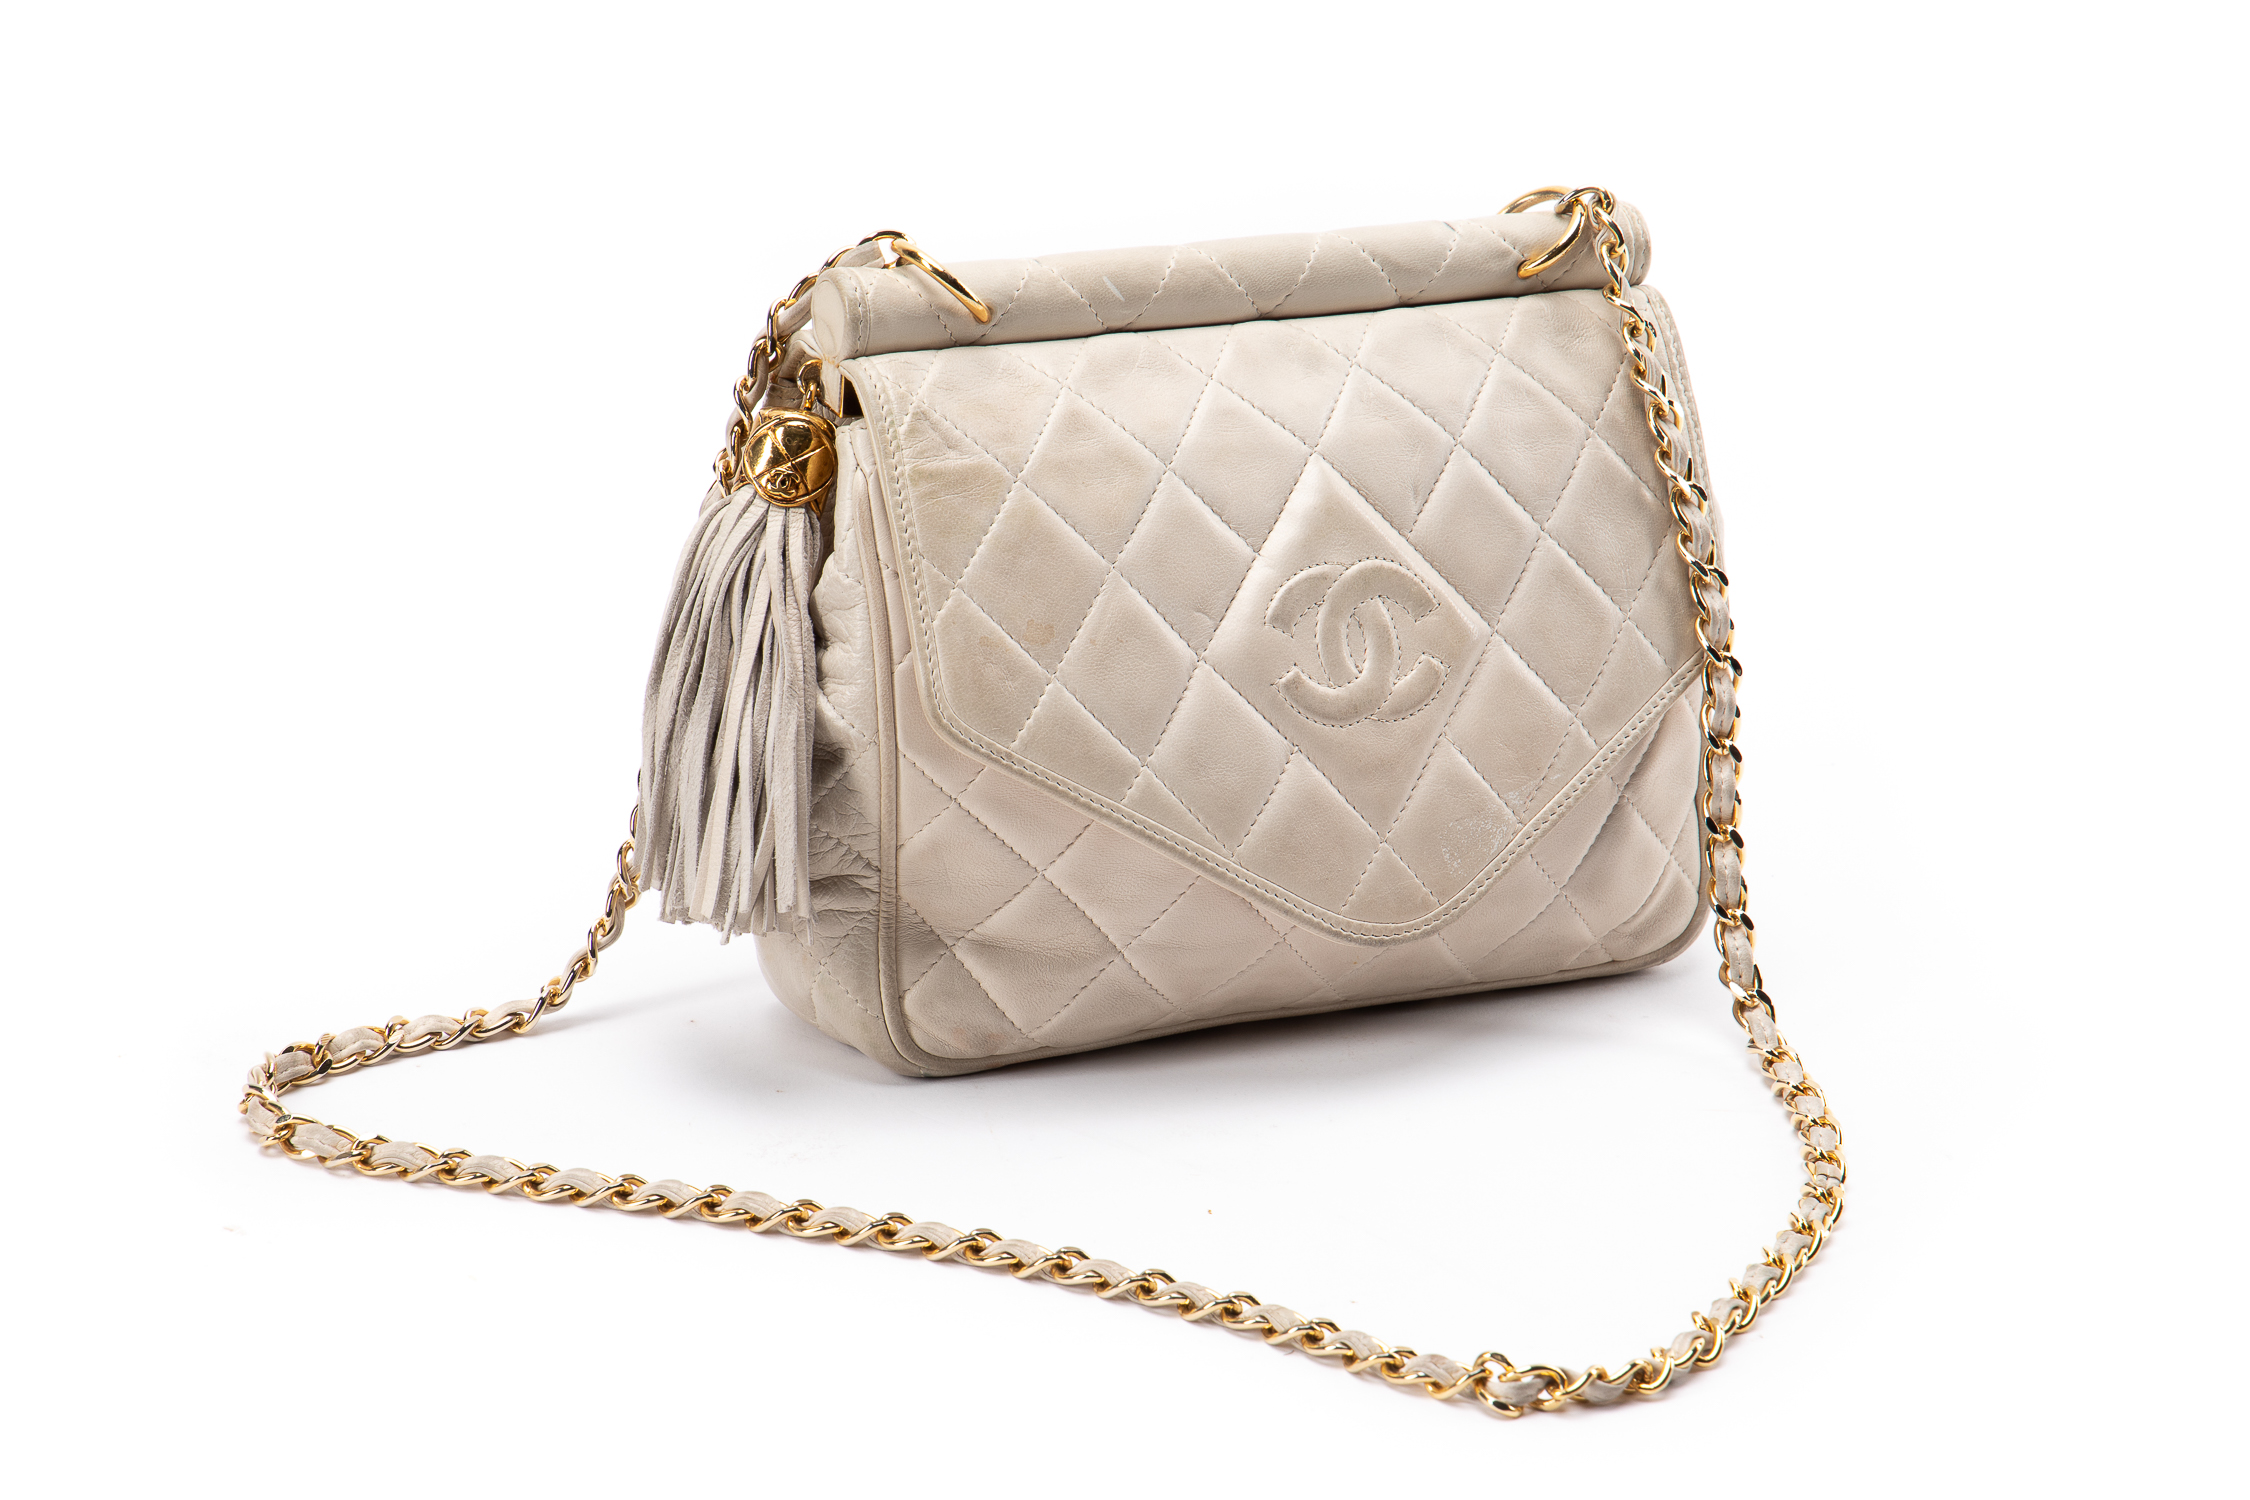 CHANEL, CREAM LEATHER QUILTED FLAP